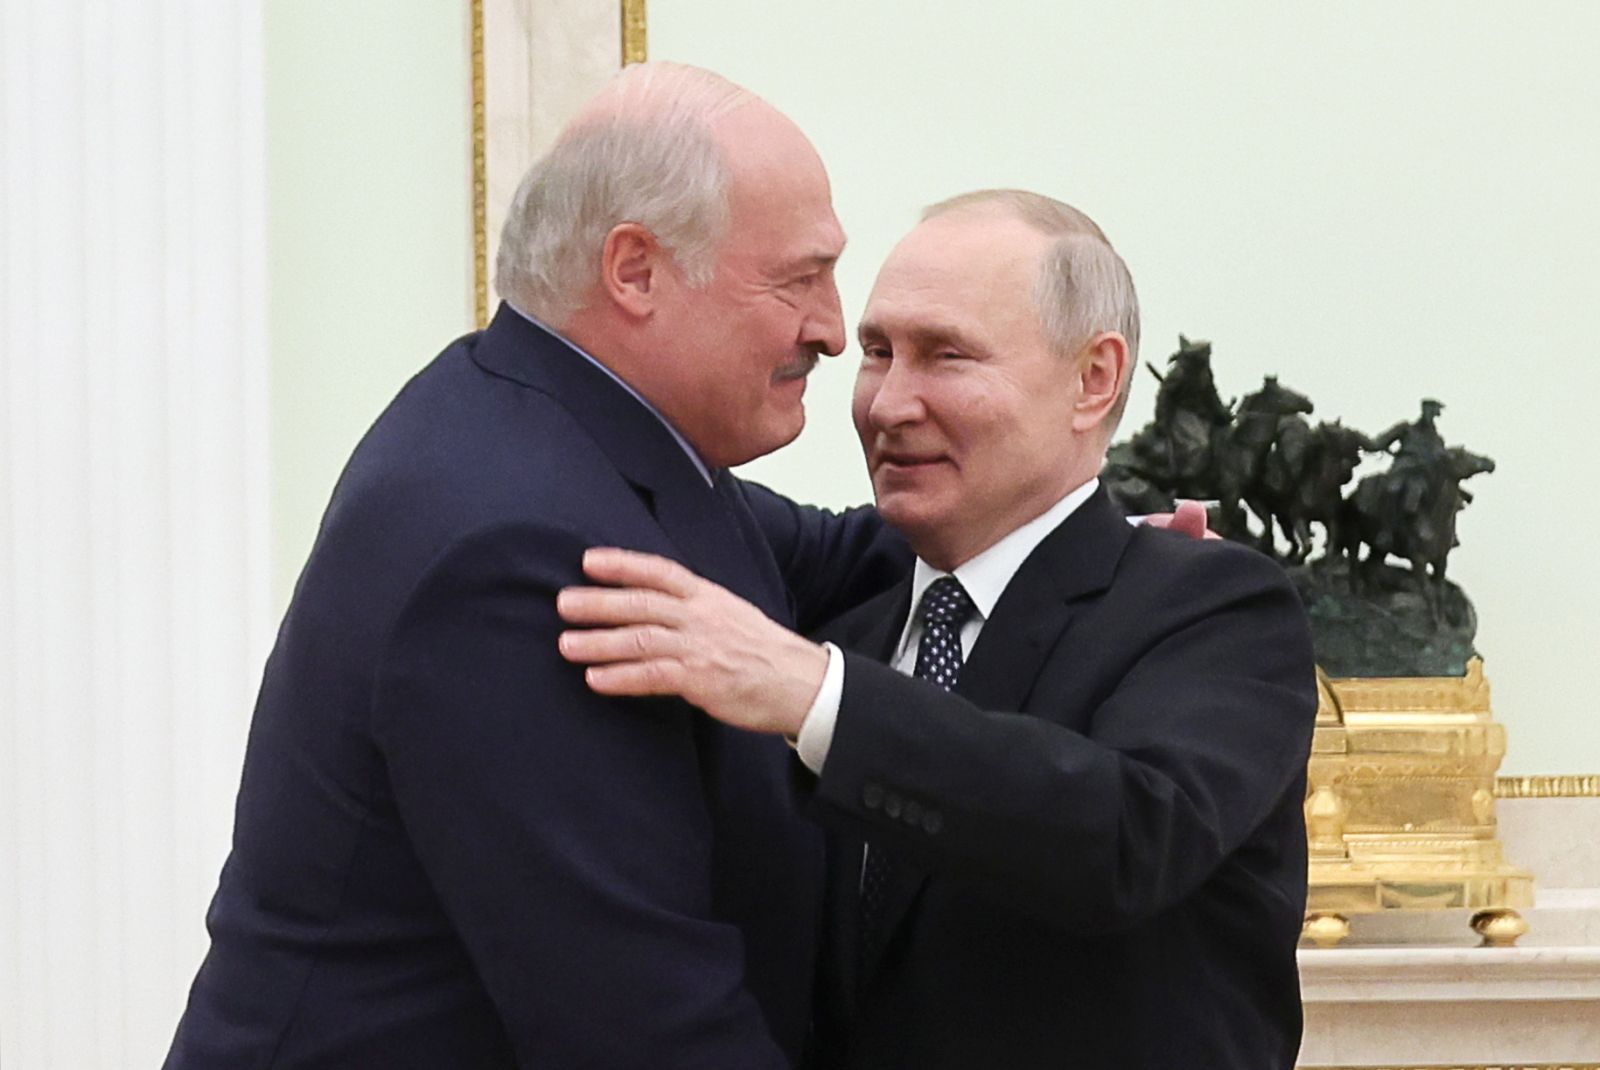 epa10560162 Russian President Vladimir Putin (R) welcomes Belarusian President Alexander Lukashenko during a meeting at the Kremlin in Moscow, Russia, 05 April 2023. The meeting is taking place on the eve of the meeting of the Supreme State Council (SSC) of the Union State, scheduled for 06 April. Russia and Belarus through joint efforts have achieved good results both in the international arena and in resolving security issues of the two states, Vladimir Putin said. On 25 March, Putin issued new threats against Western countries supporting Ukraine, announcing an agreement with Belarusian ruler Alexander Lukashenko to deploy tactical nuclear weapons in the country.  EPA/MIKHAEL KLIMENTYEV/SPUTNIK/KREMLIN POOL MANDATORY CREDIT